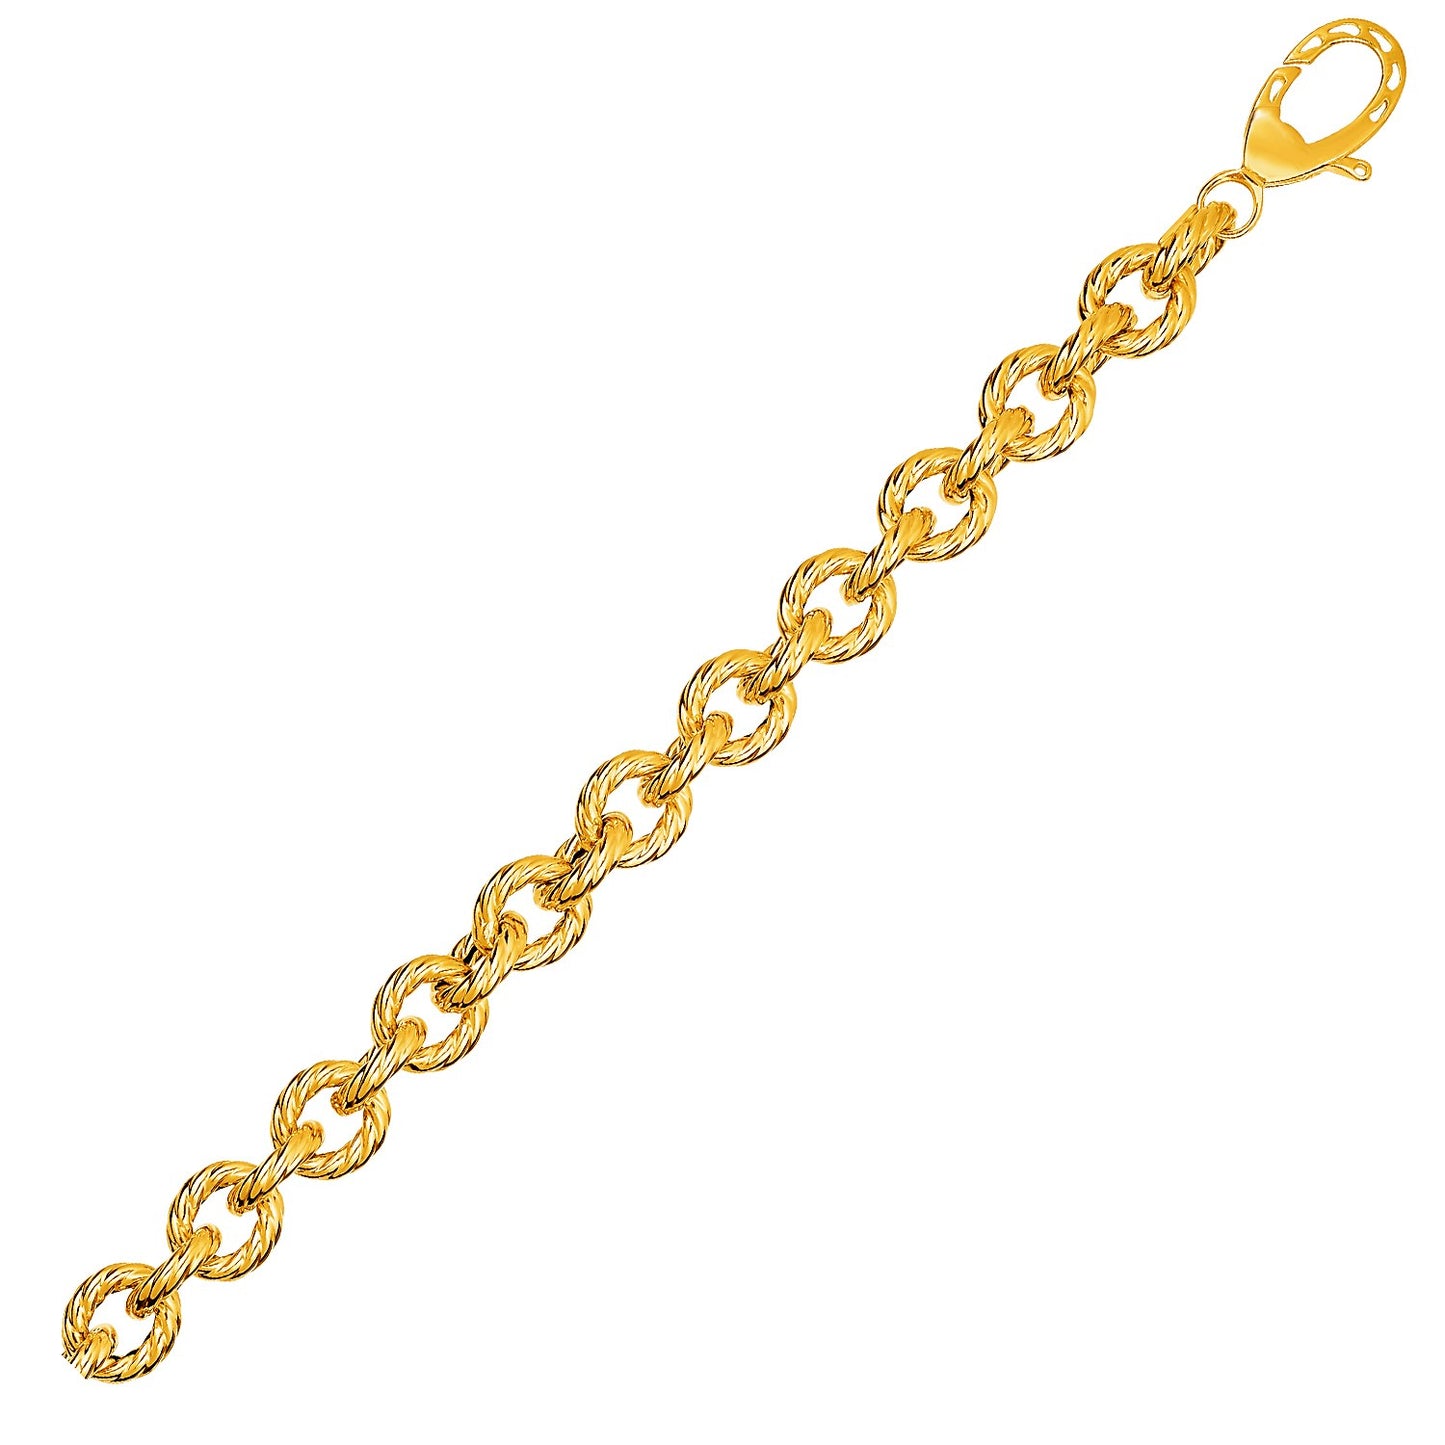 Textured Oval Link Bracelet in 14k Yellow Gold